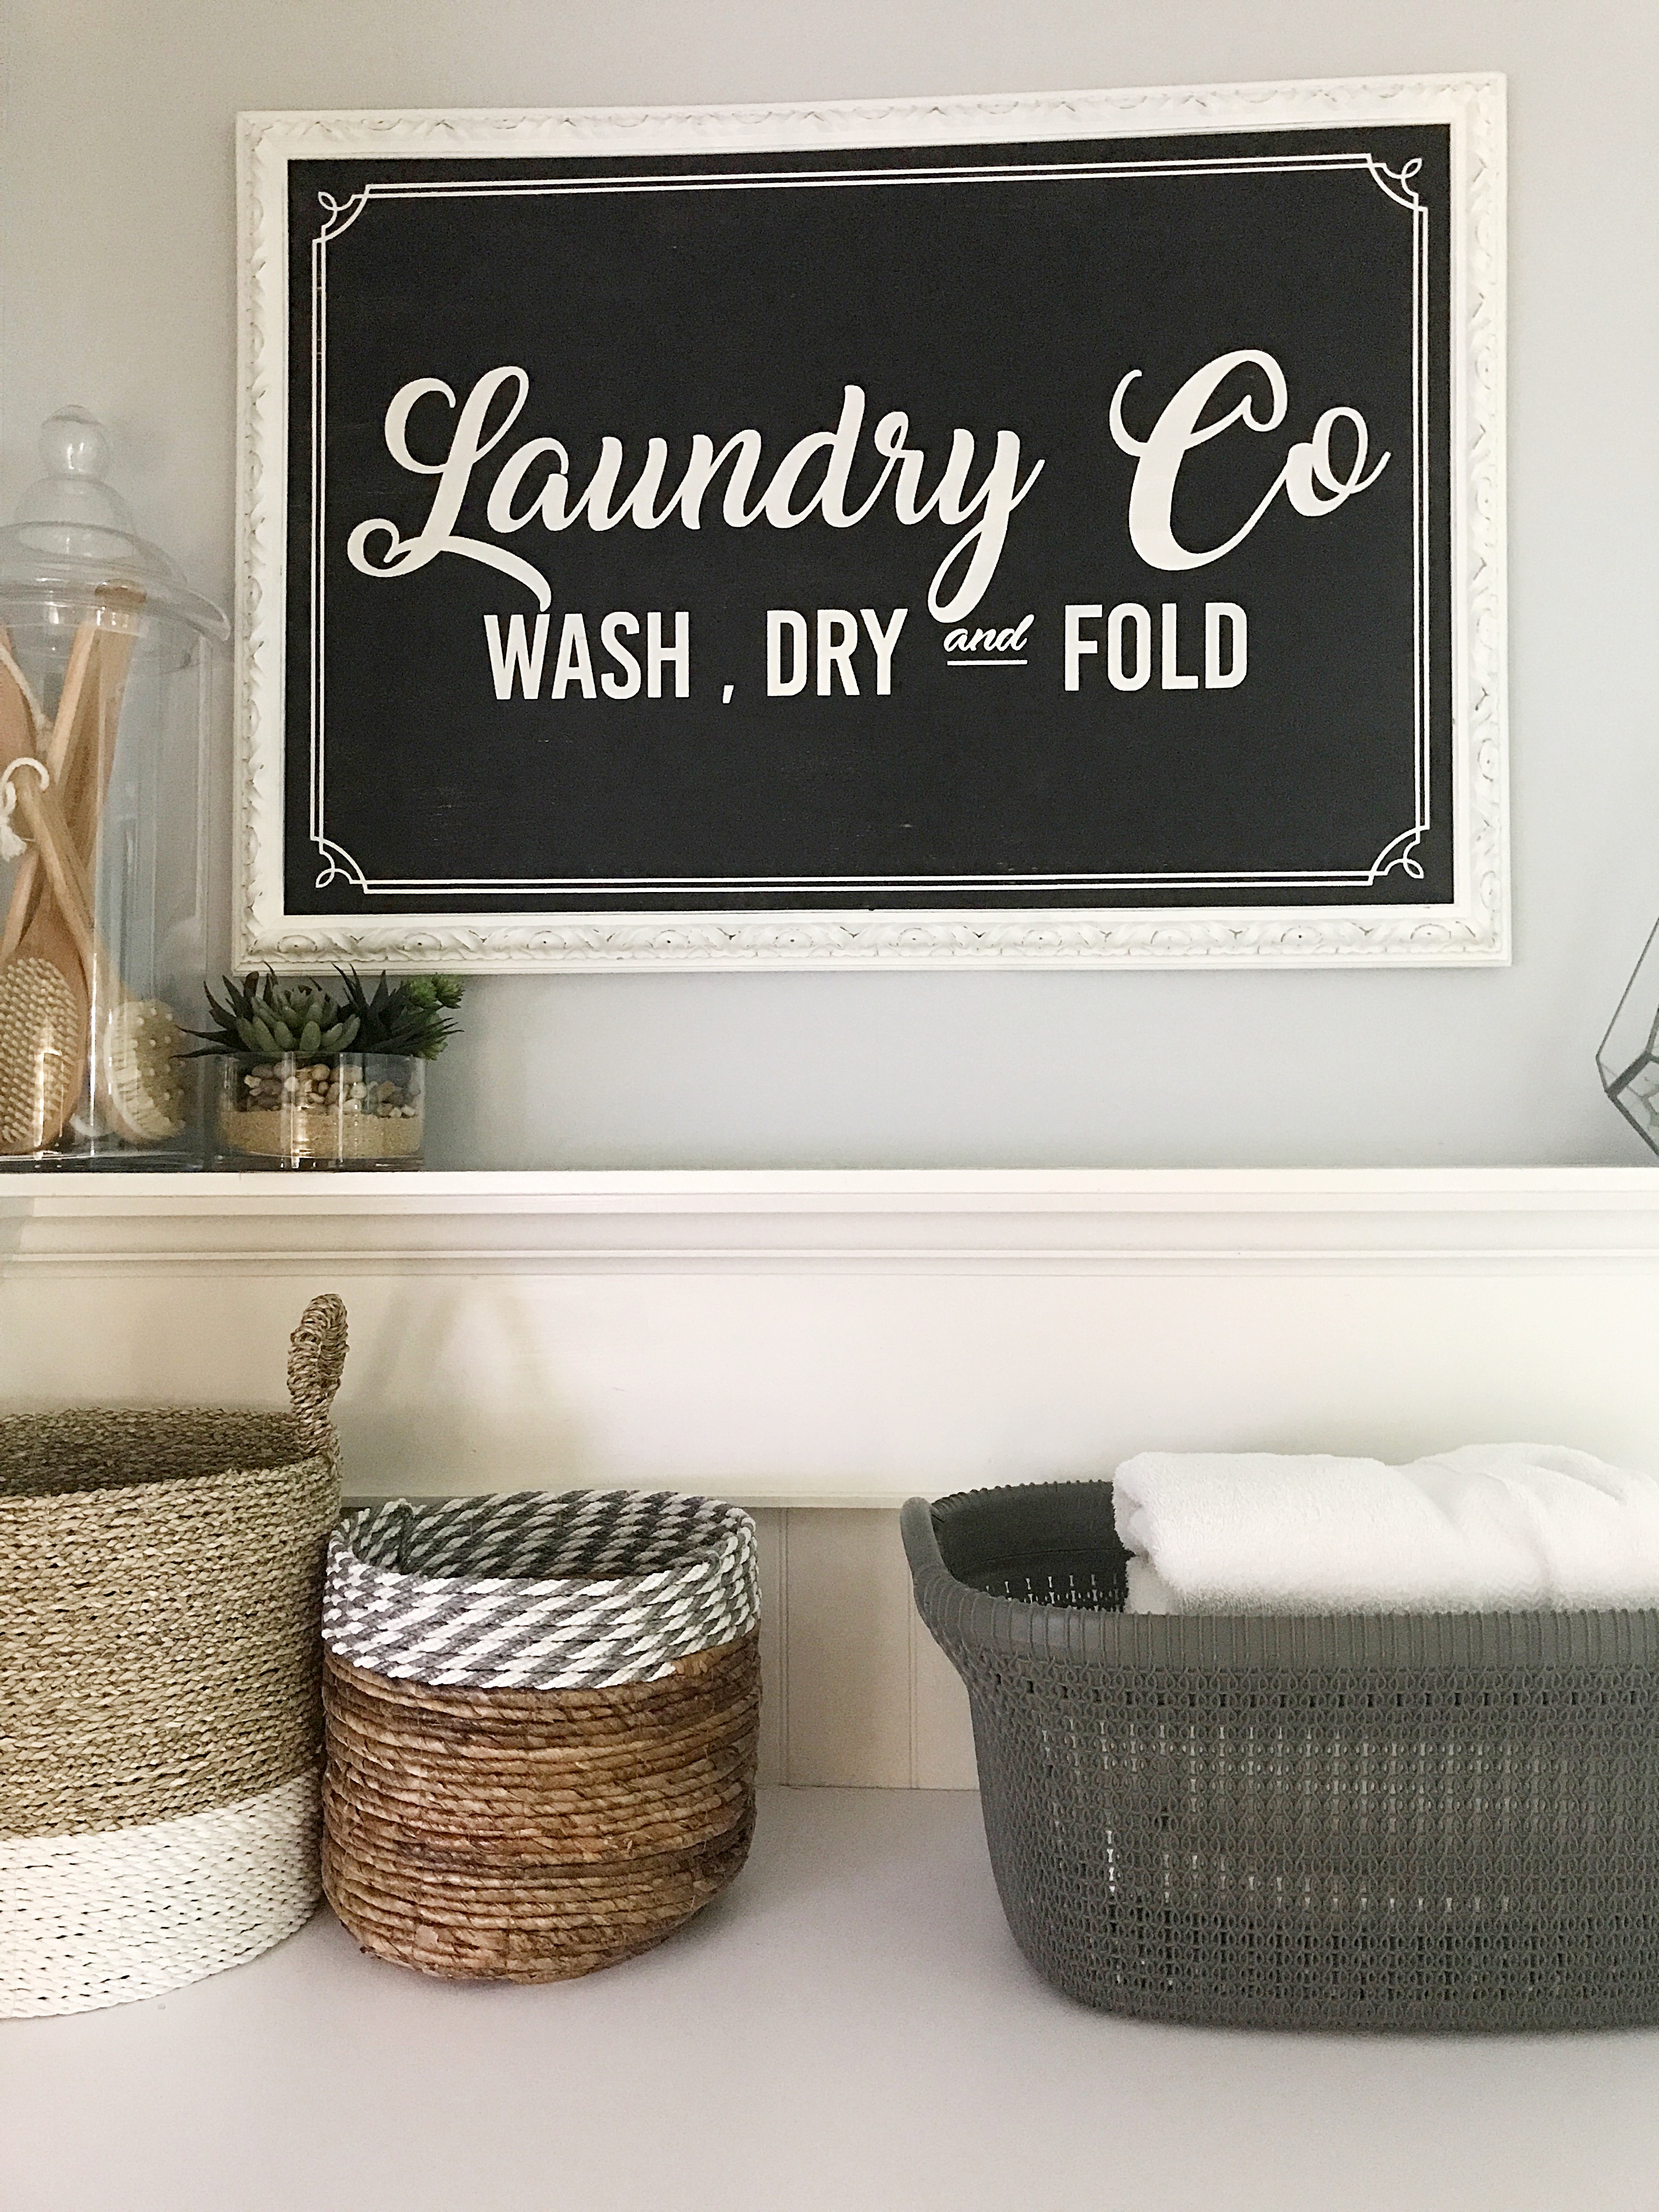 How to Organize Your Laundry Room For The New Year|new update|laundry room update|laundry room makeover|organize laundry room|farmhouse laundry room|farmhouse home decor|shabby chic farmhouse|modern farmhouse|modern laundry room|hallstrom Home